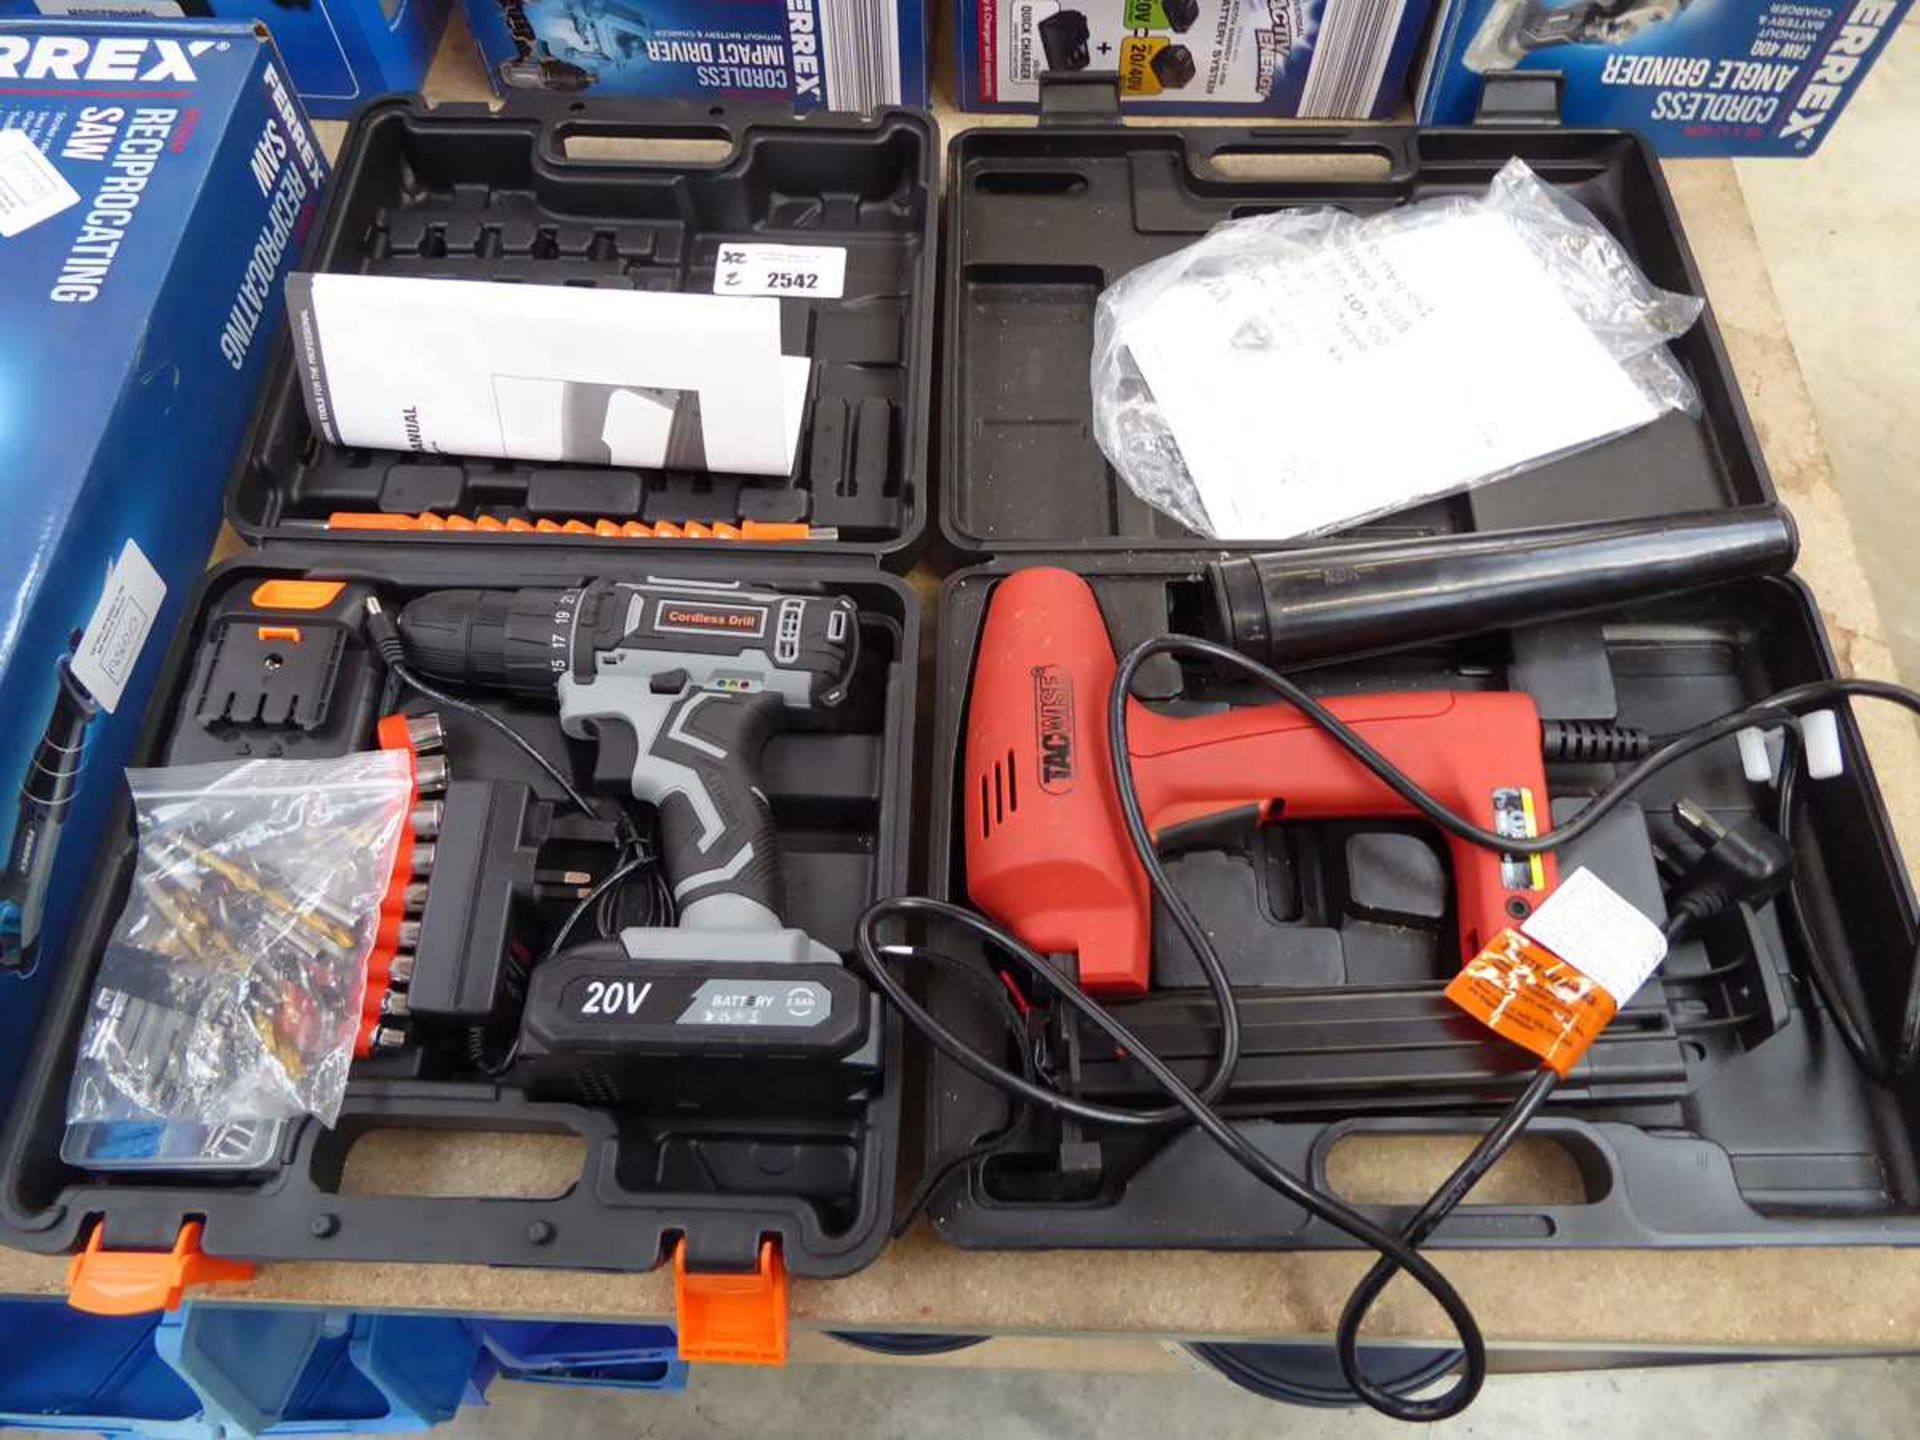 +VAT 20V cordless drill with Tacwise Master nailer - Image 2 of 2